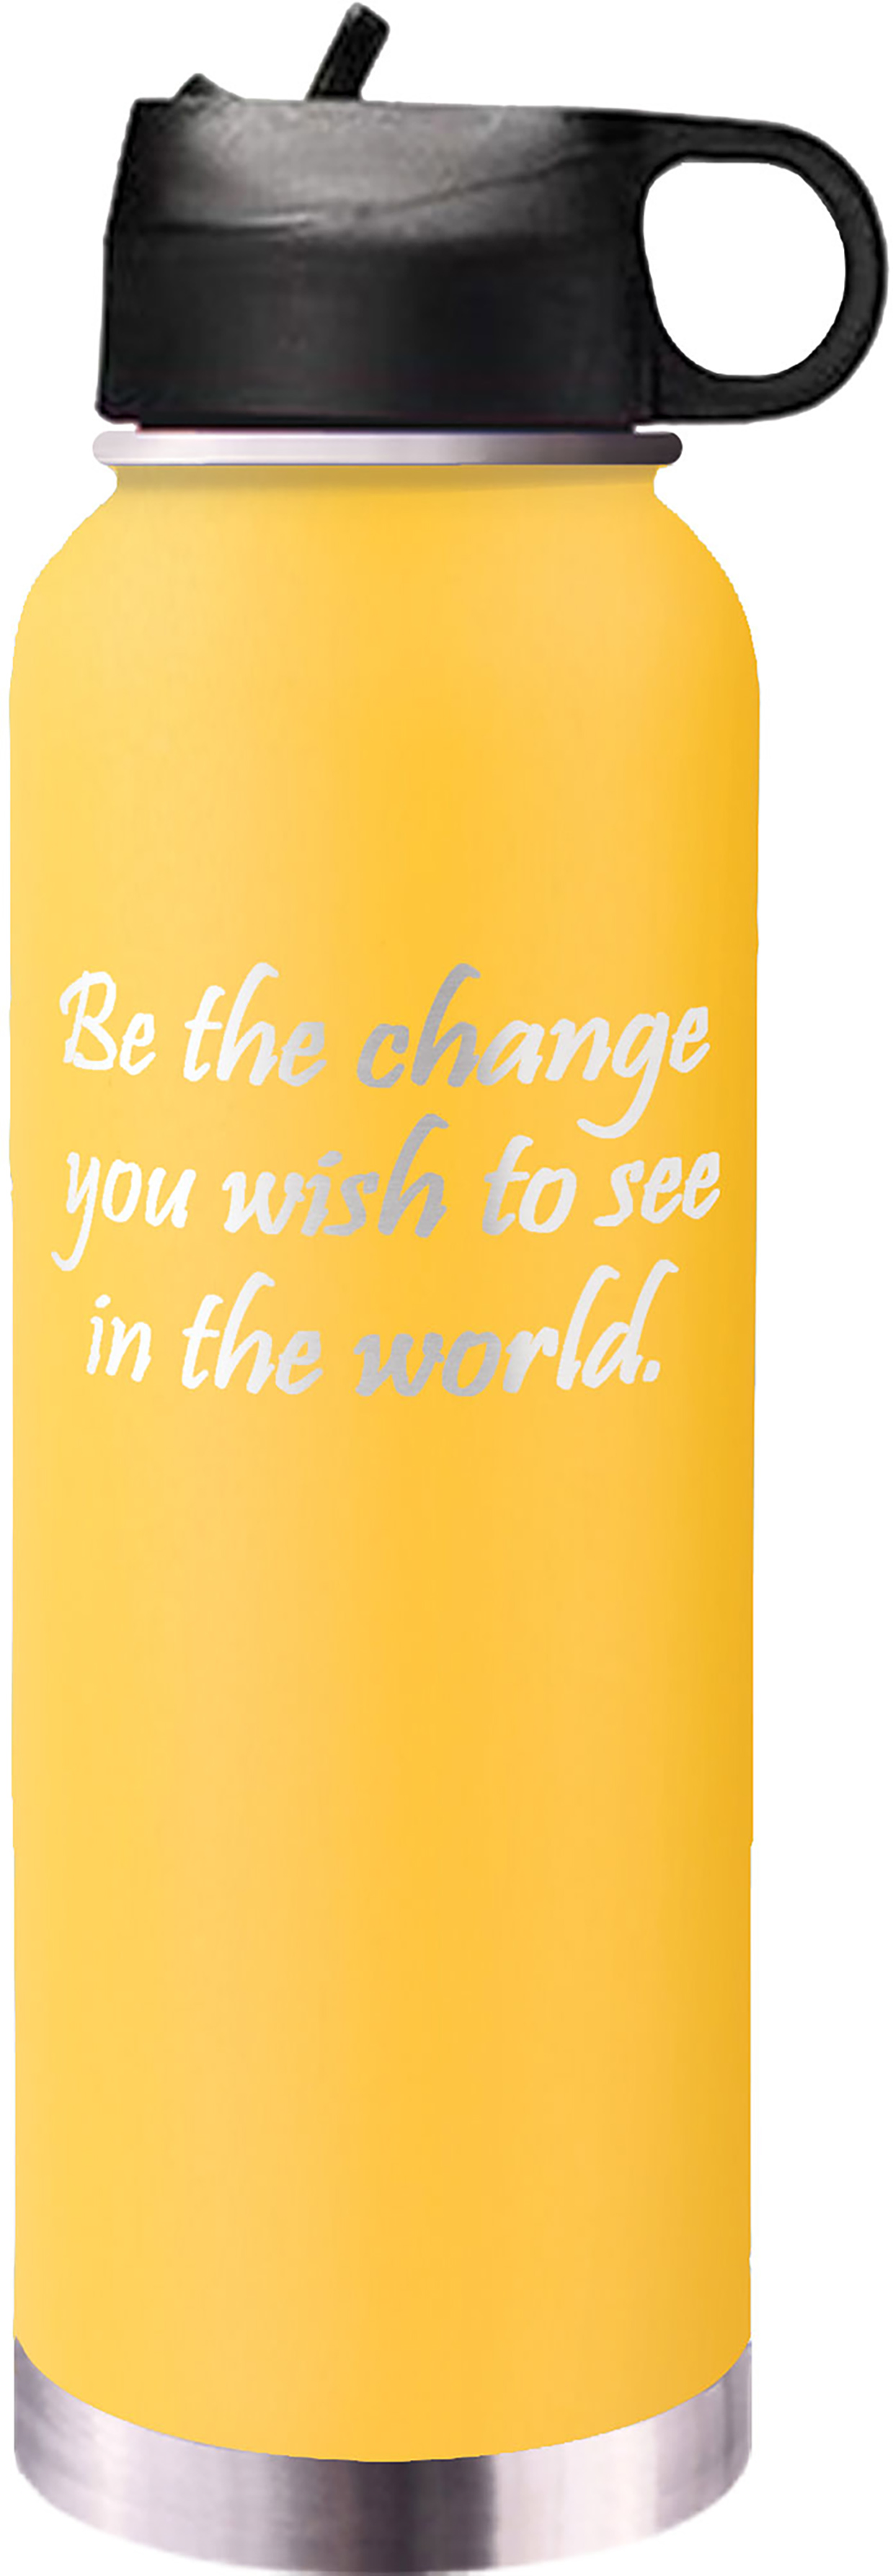 Tahoe© 32 oz. Insulated Water Bottle - Yellow